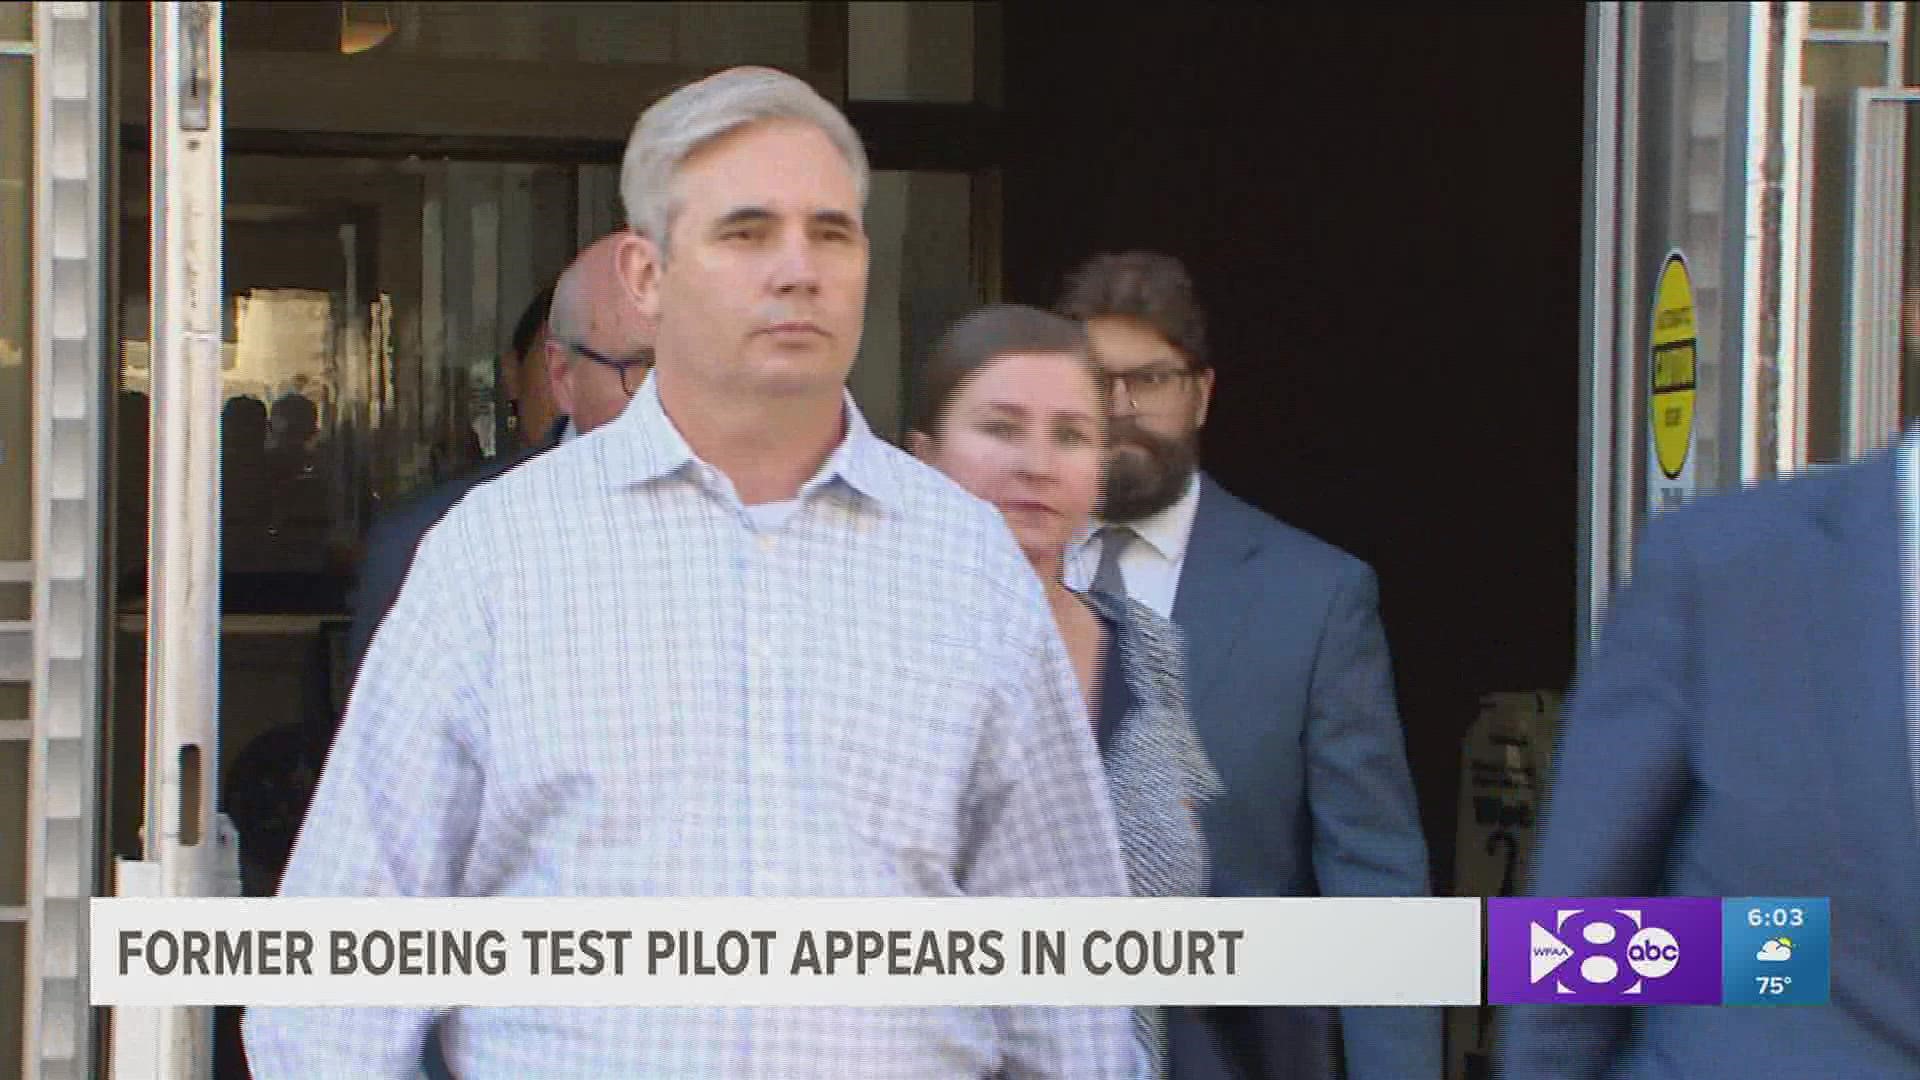 Mark Forkner was indicted by a federal grand jury, accused of deceiving safety regulators who were evaluating the plane.